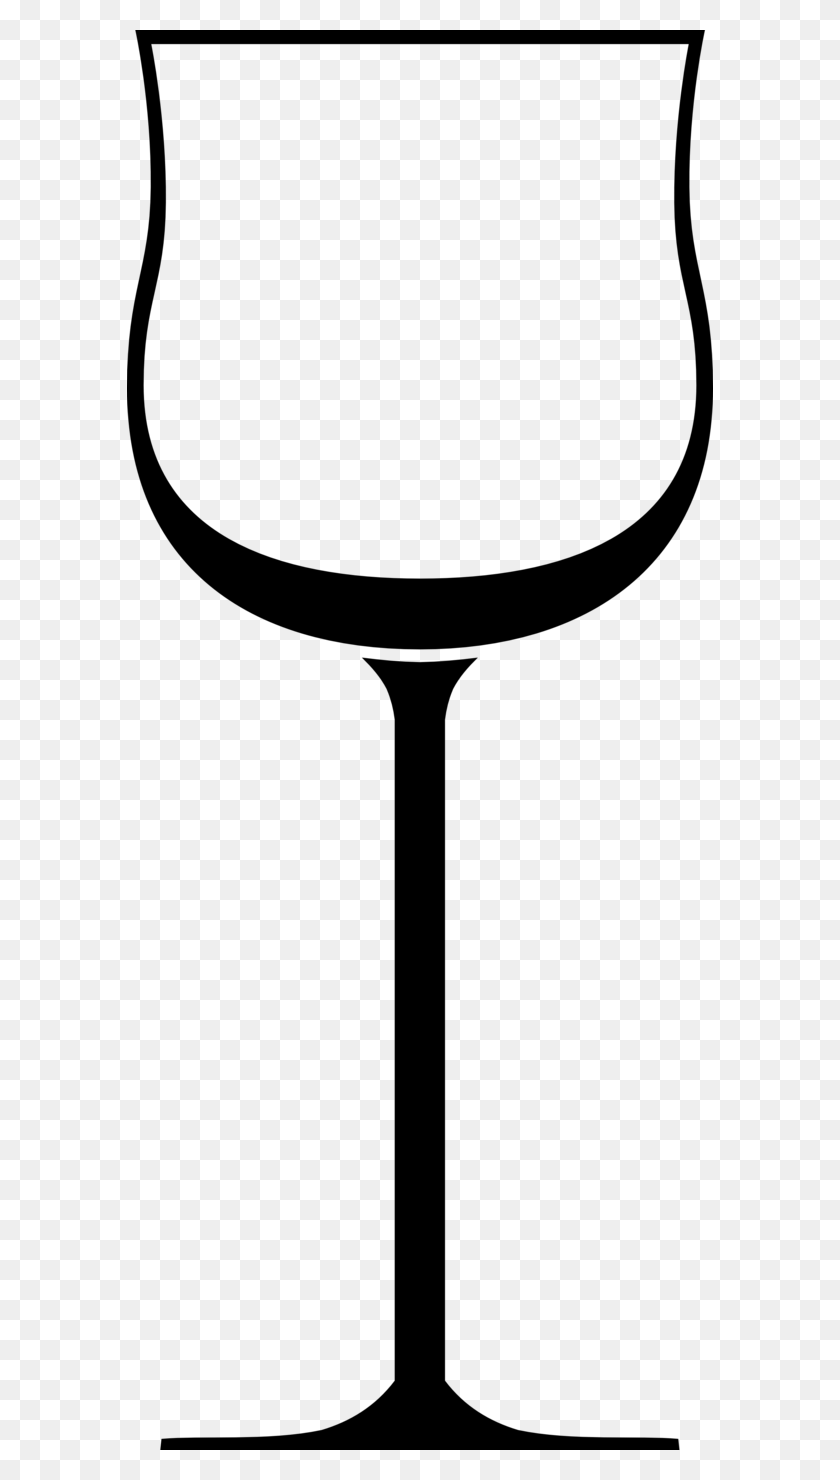 586x1420 Free Wine Glass Clip Art - Beer And Wine Clipart